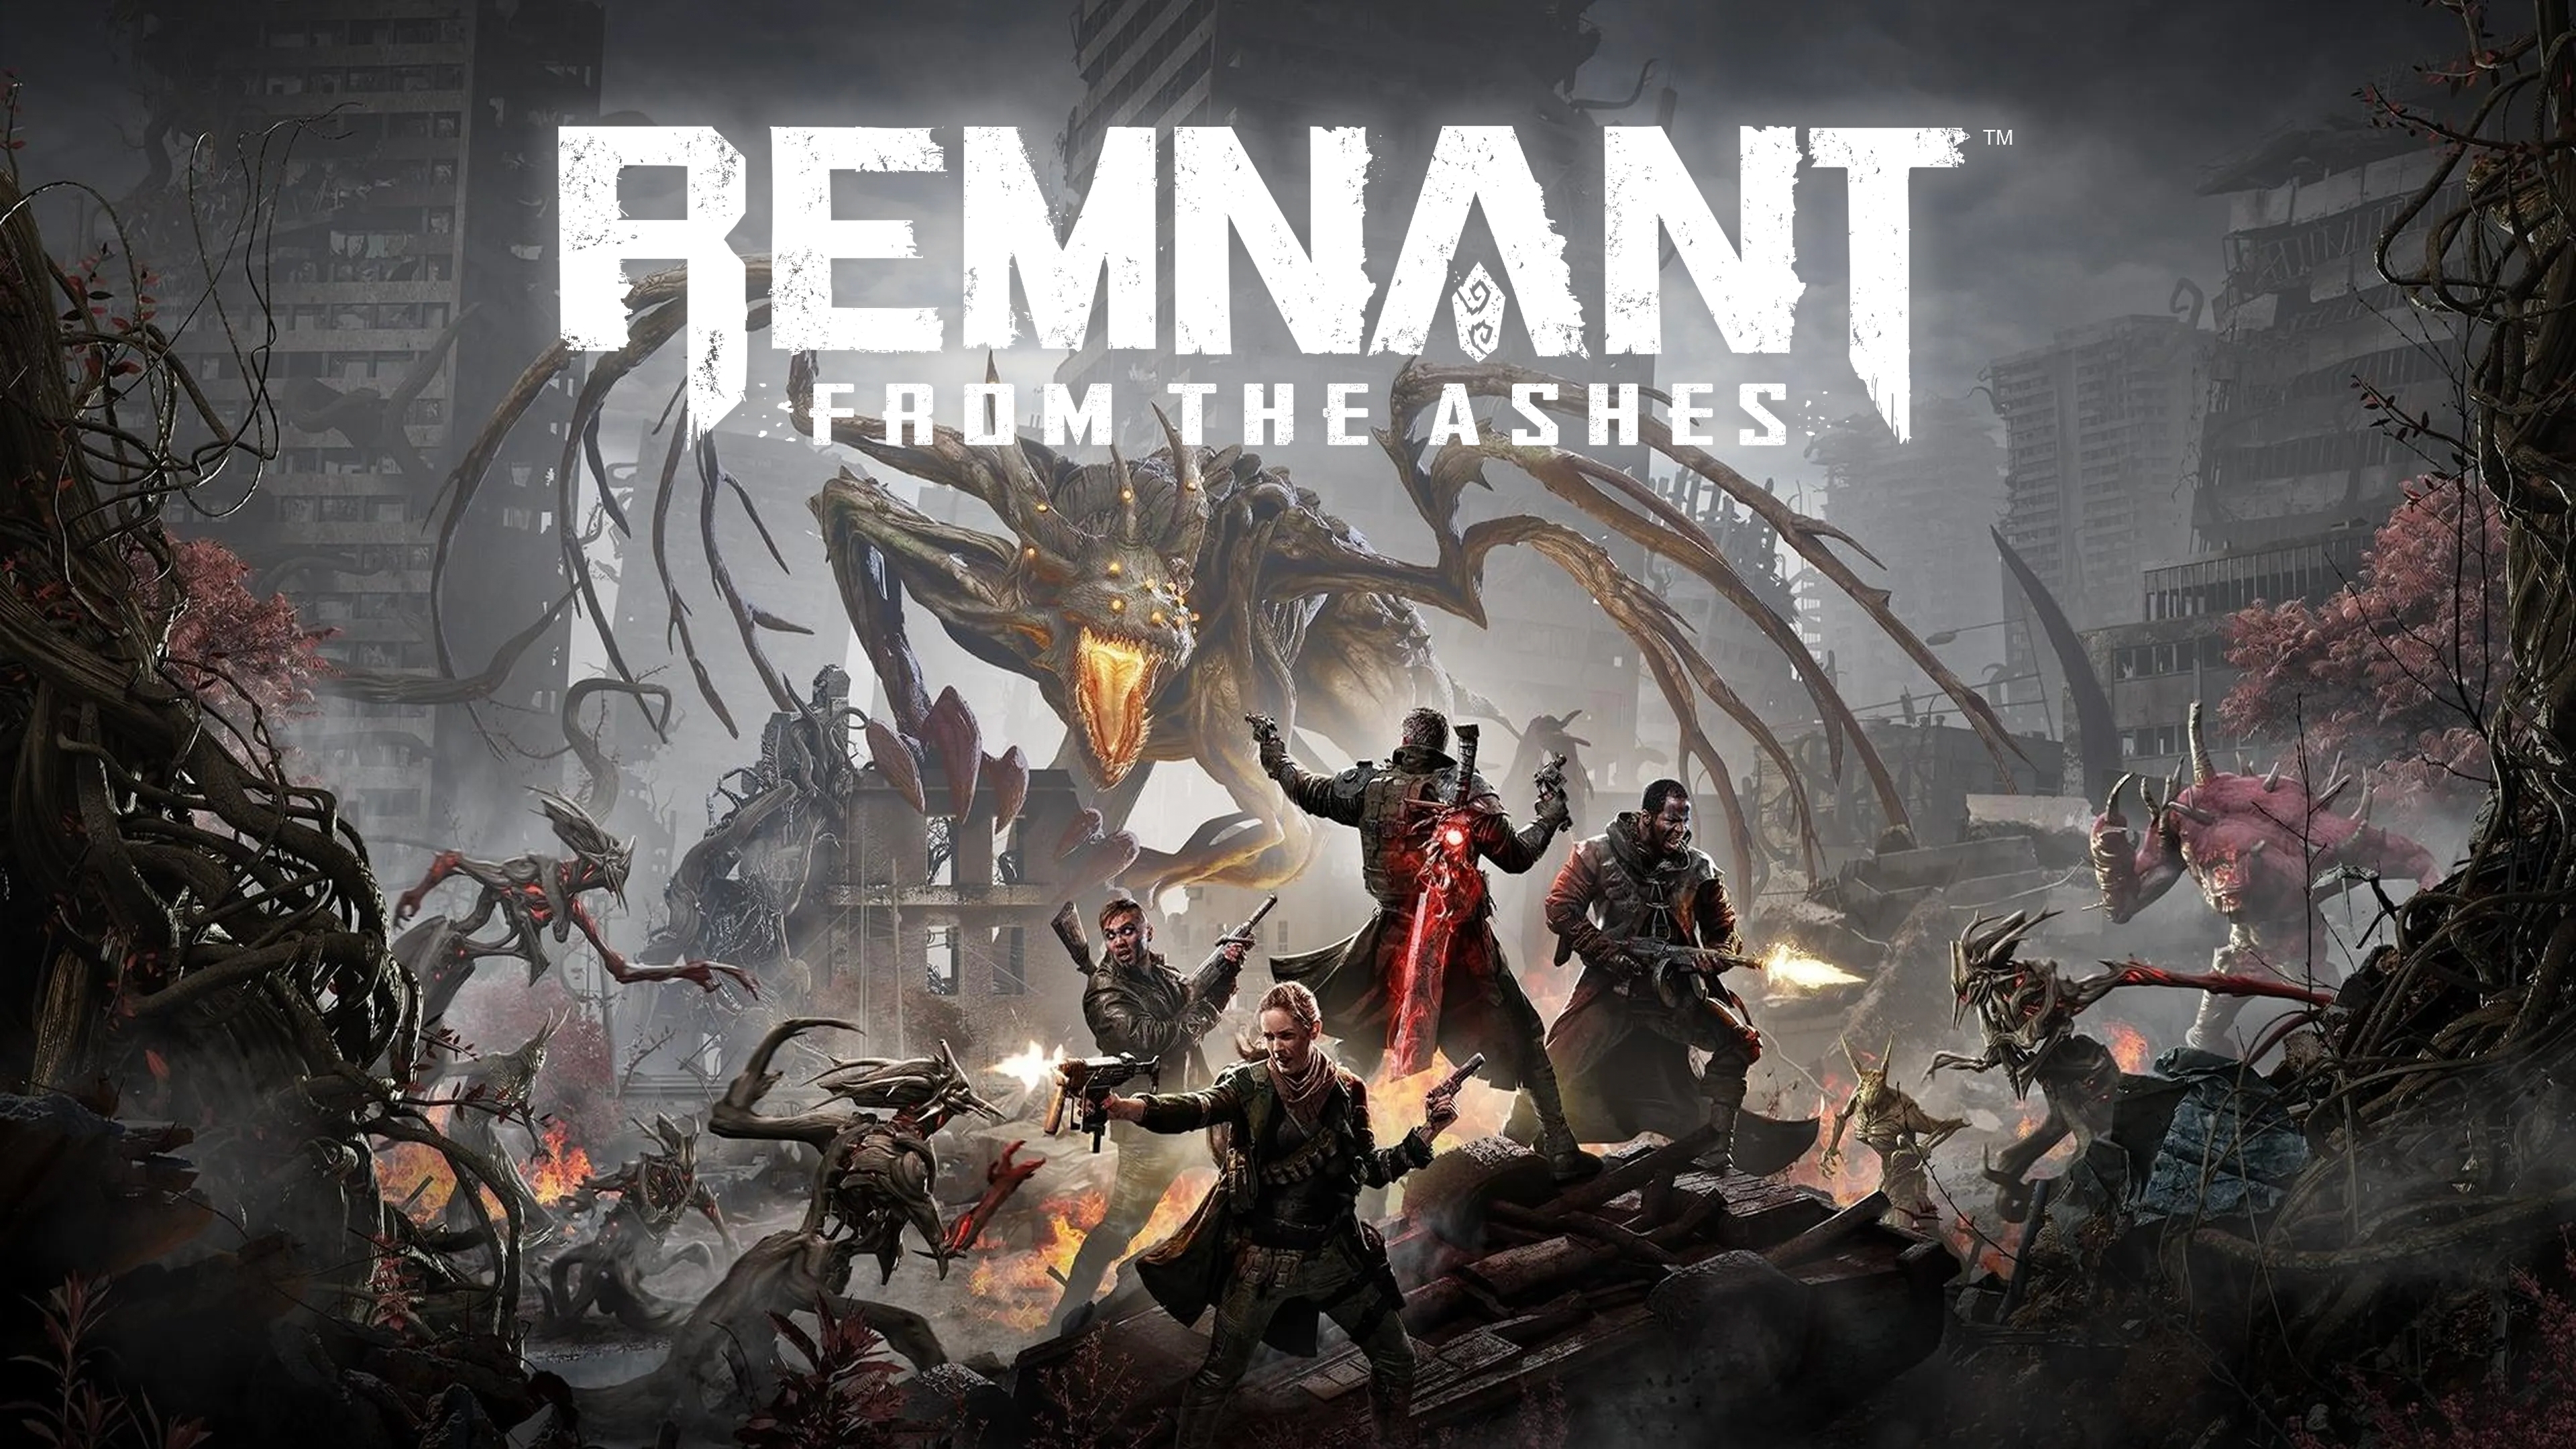 Remnant: From the Ashes is the Epic Games Store's next 'one day